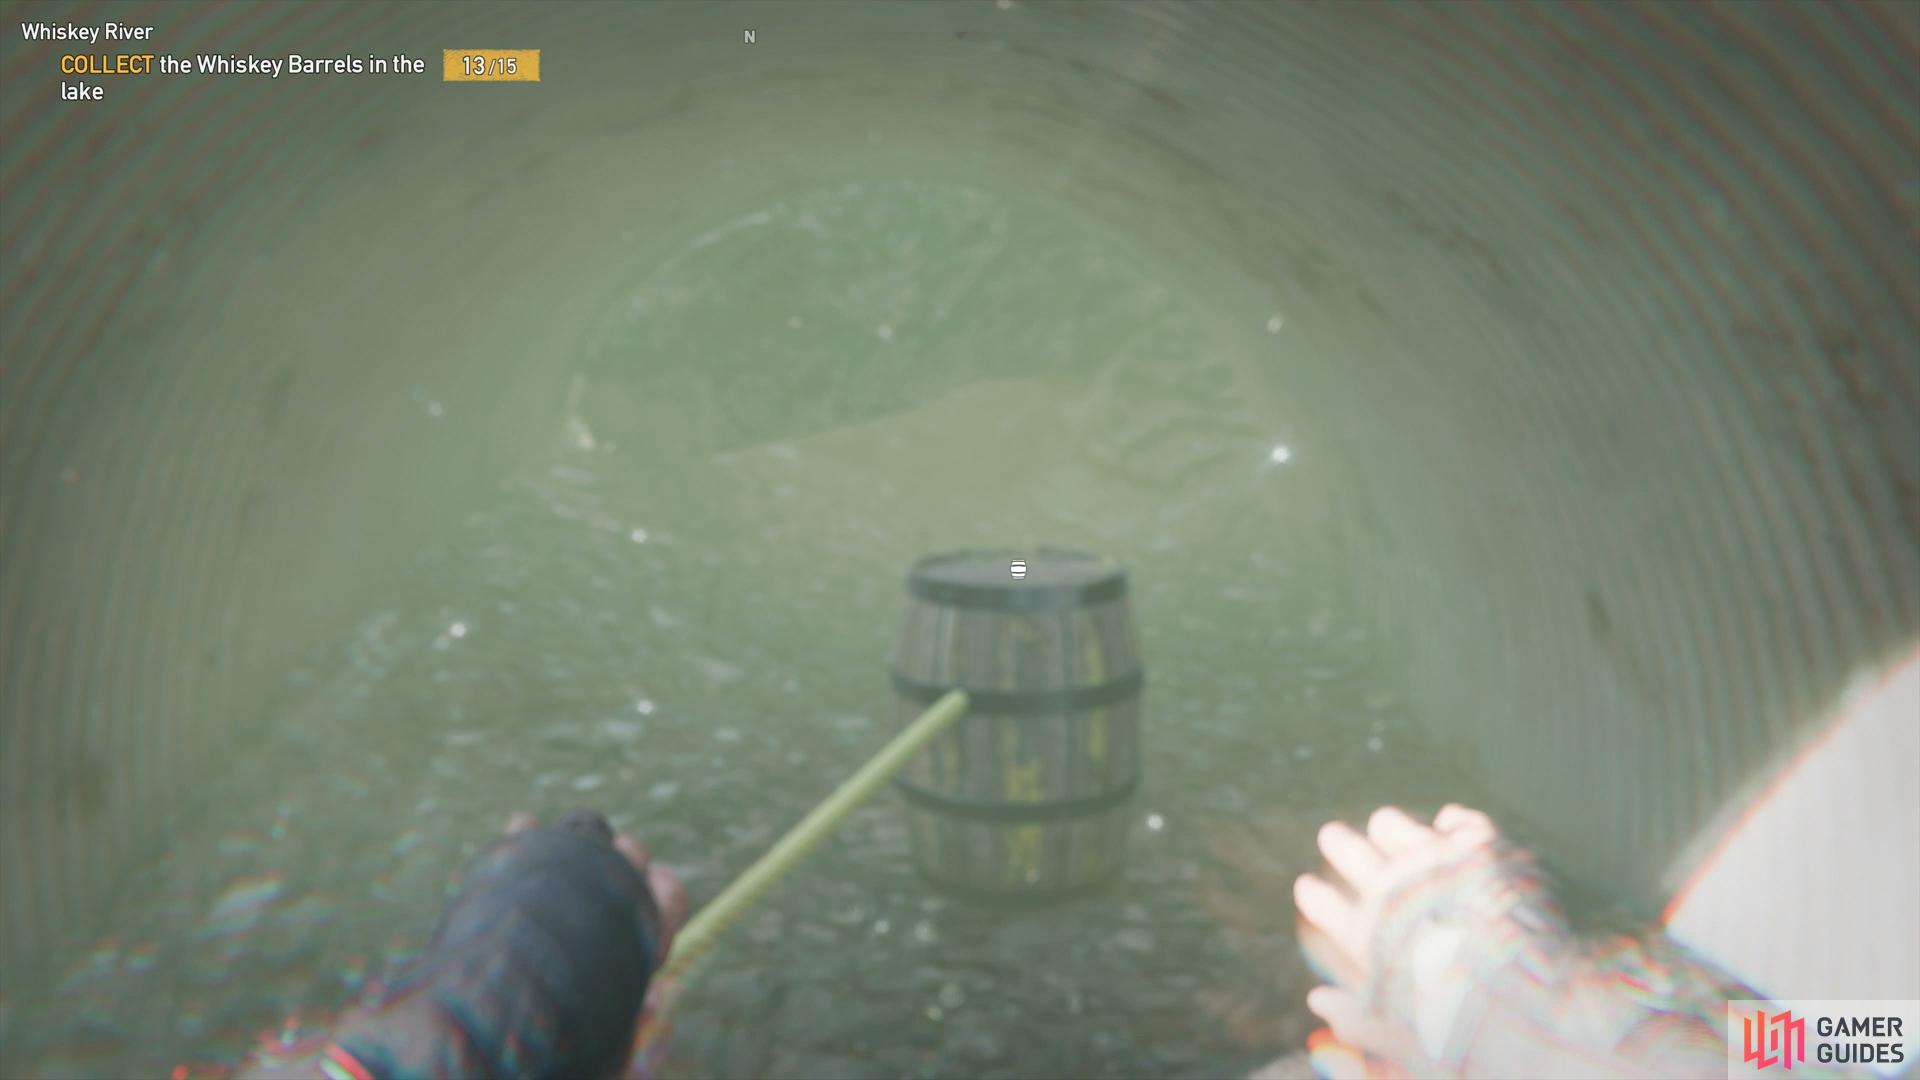 simply swim to the bottom to find this barrel.